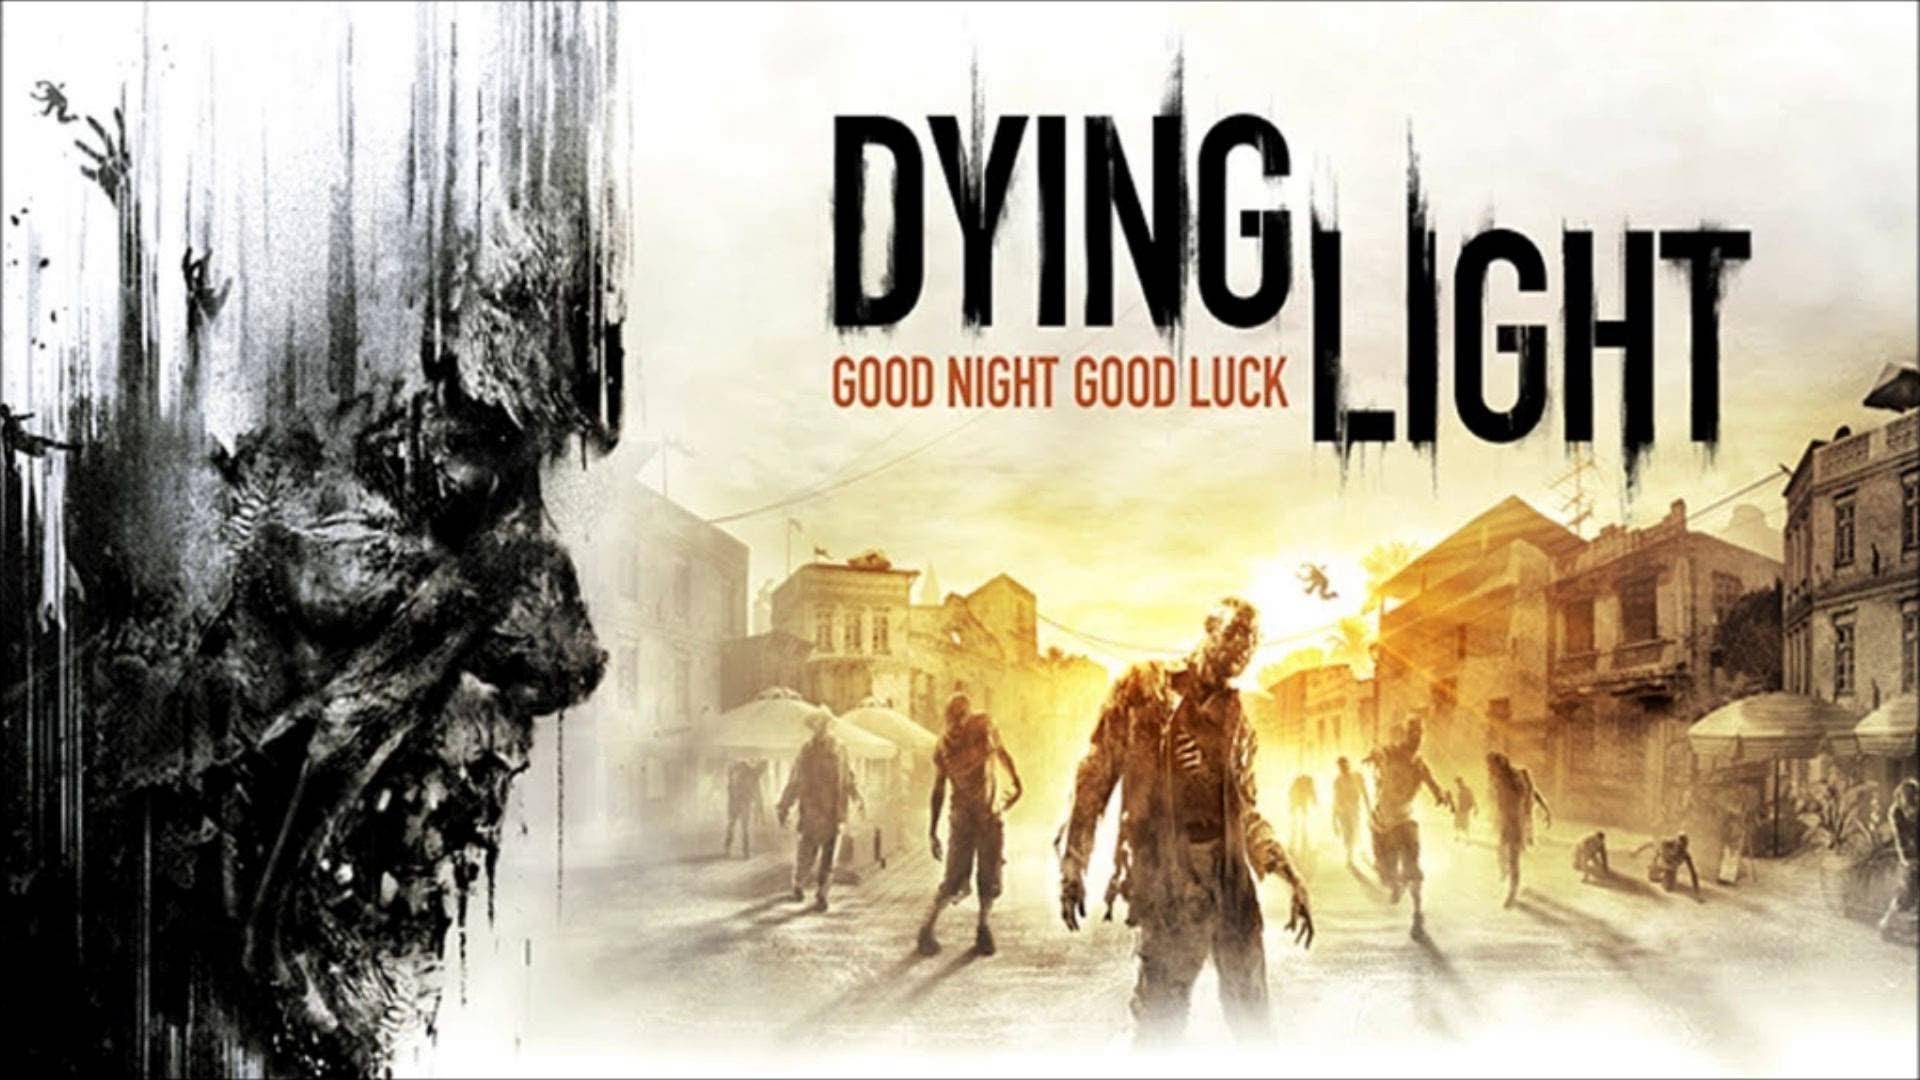 More explorable content and dirt buggies in the new expansion for Dying Light